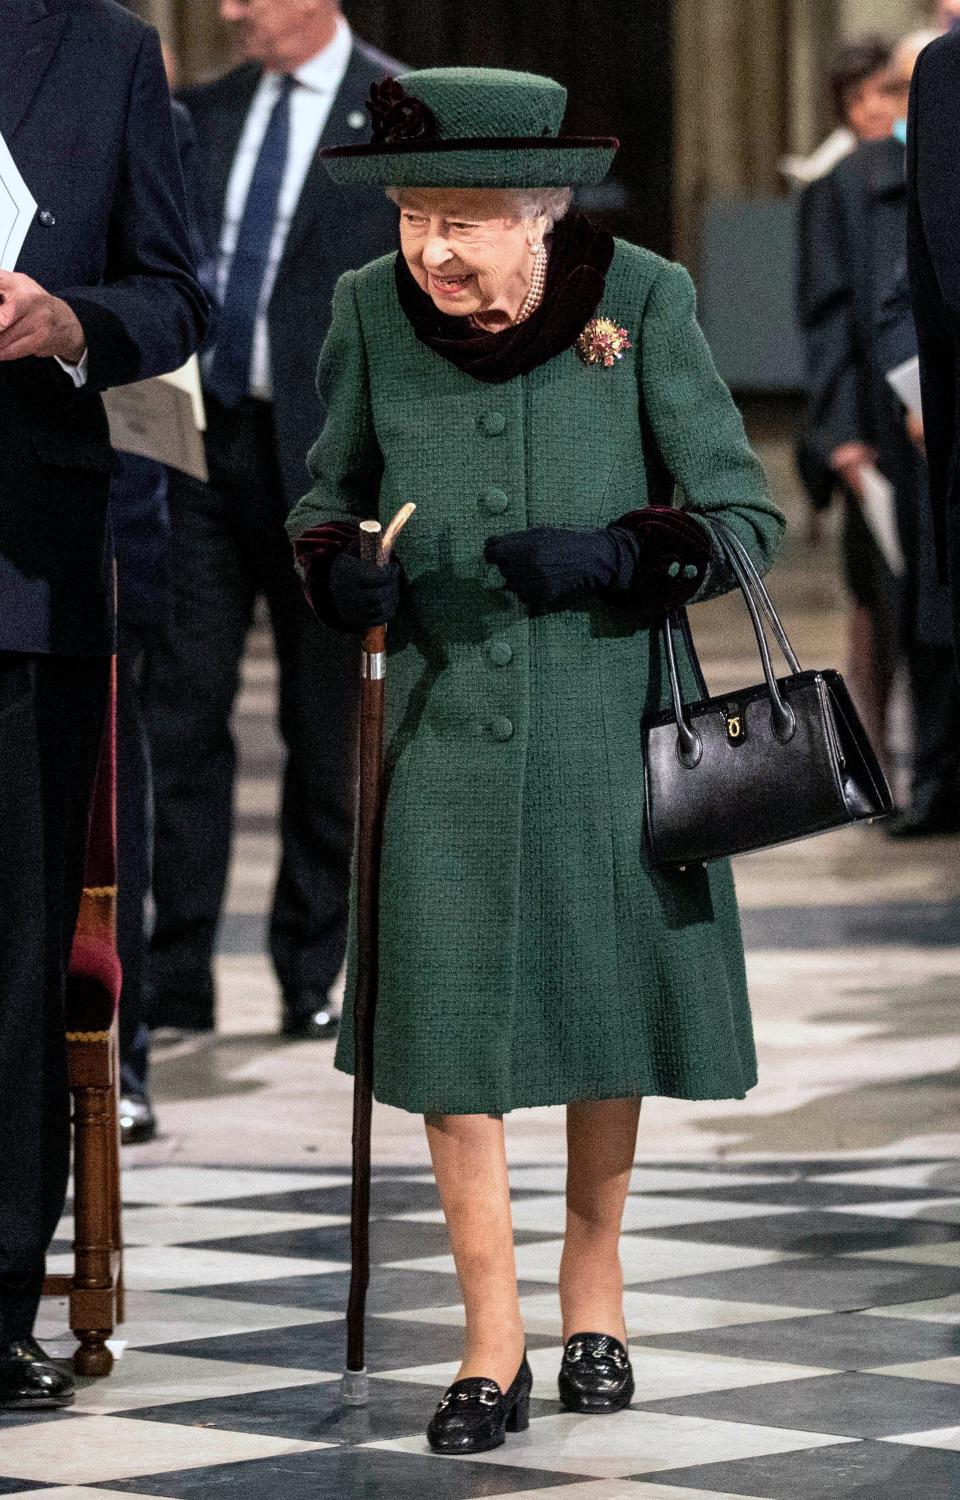 Queen Elizabeth II arrives in Westminster Abbey for the Service of Thanksgiving for the Duke of Edinburgh on March 29, 2022, in London.